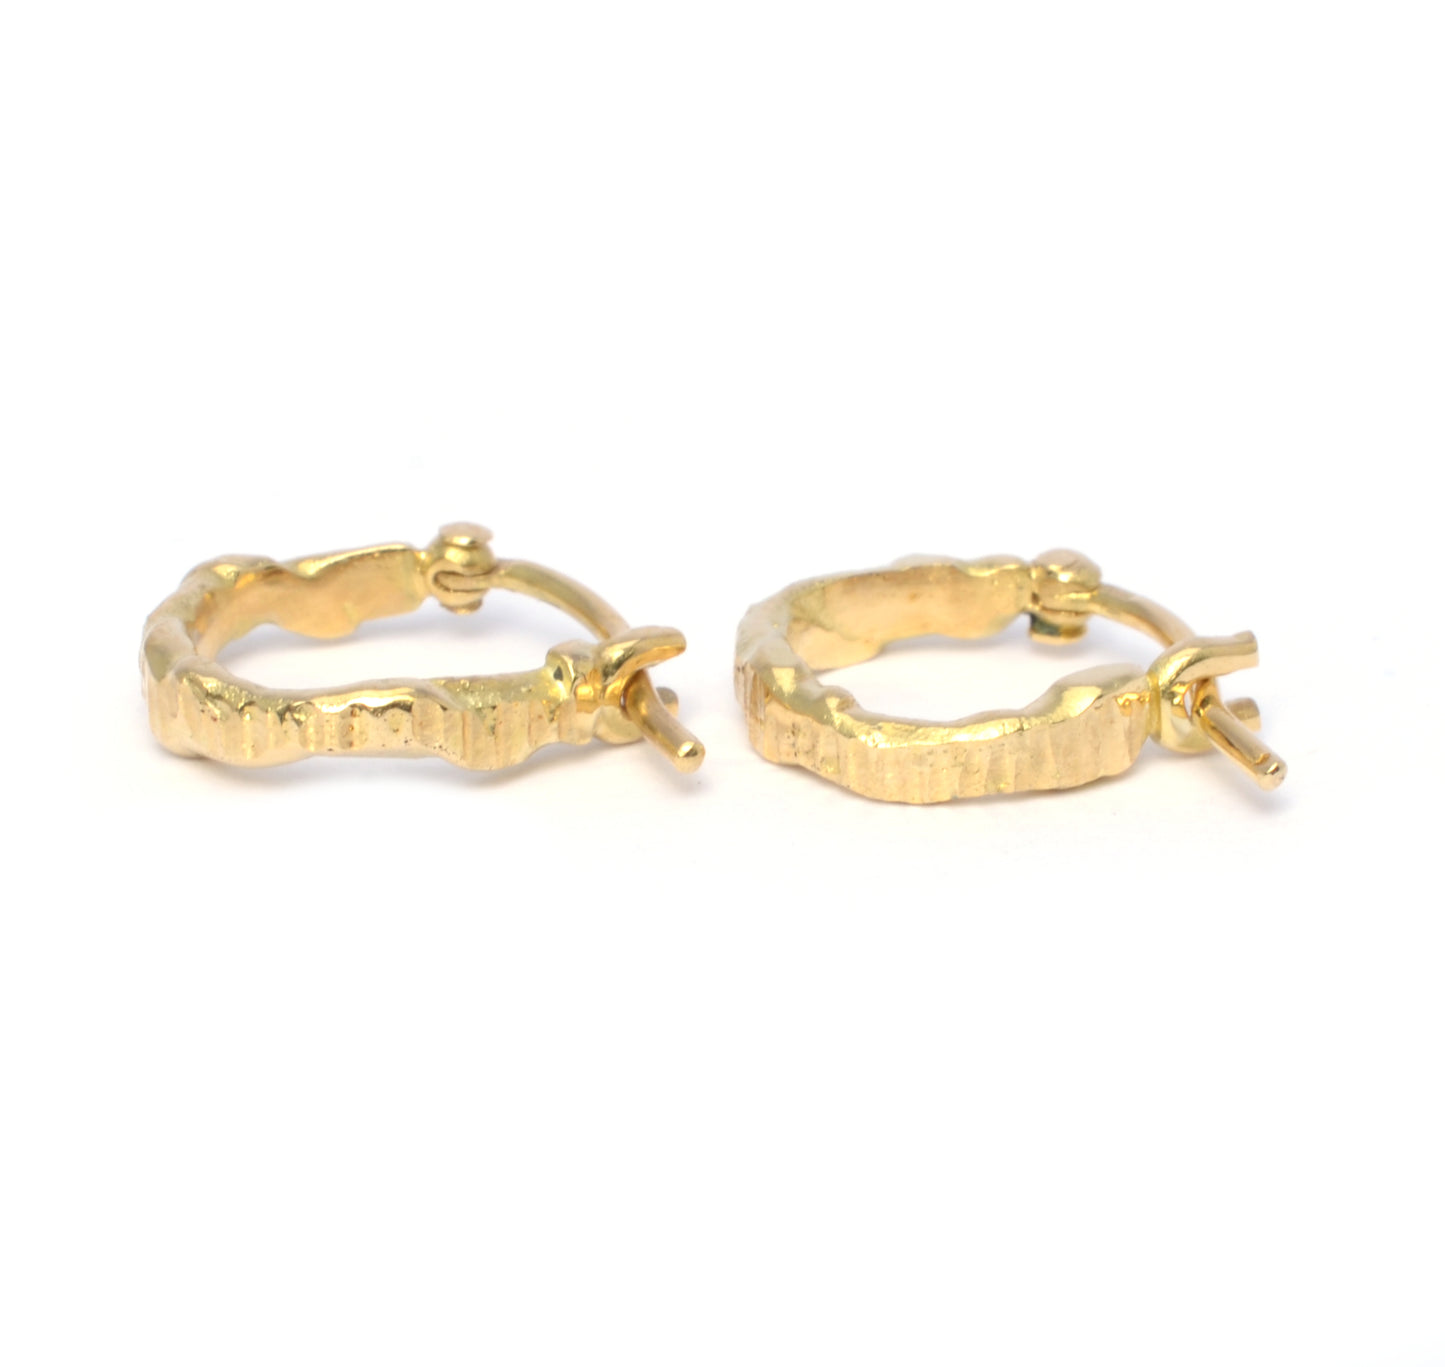 Molten and textured gold hoops